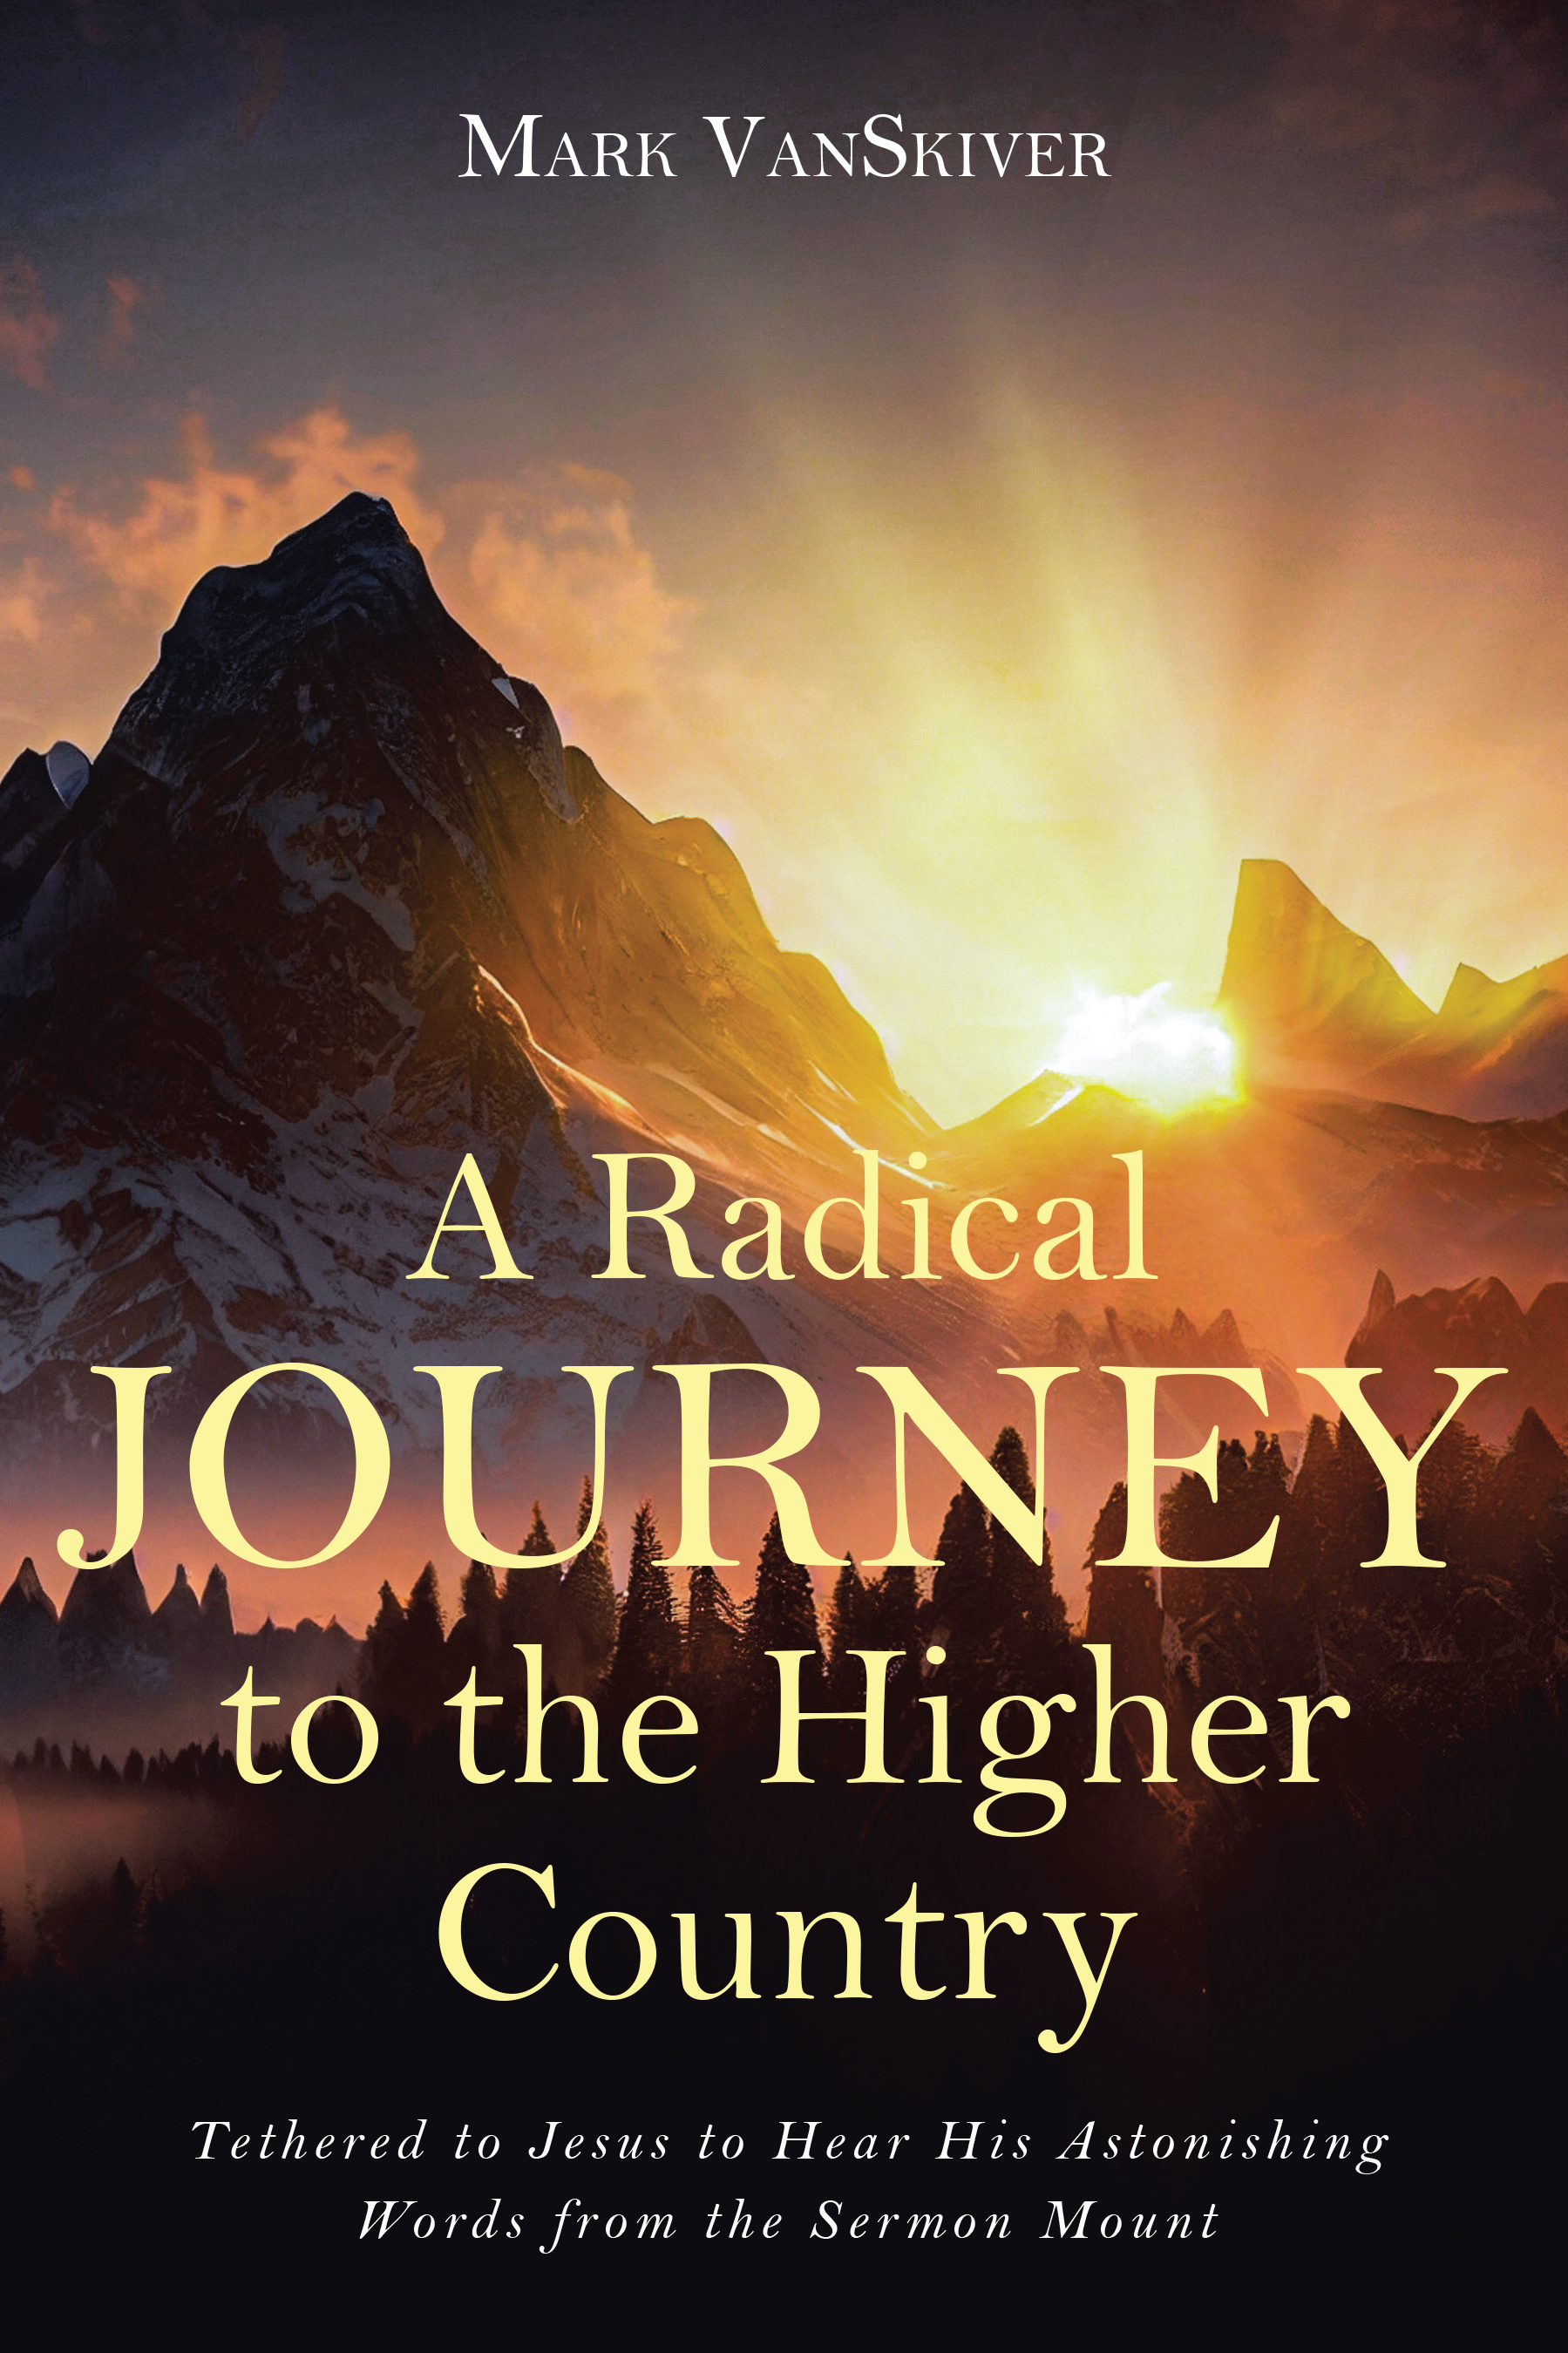 Mark VanSkiver’s Newly Released "A Radical Journey to the Higher Country" is a Transformative Spiritual Exploration